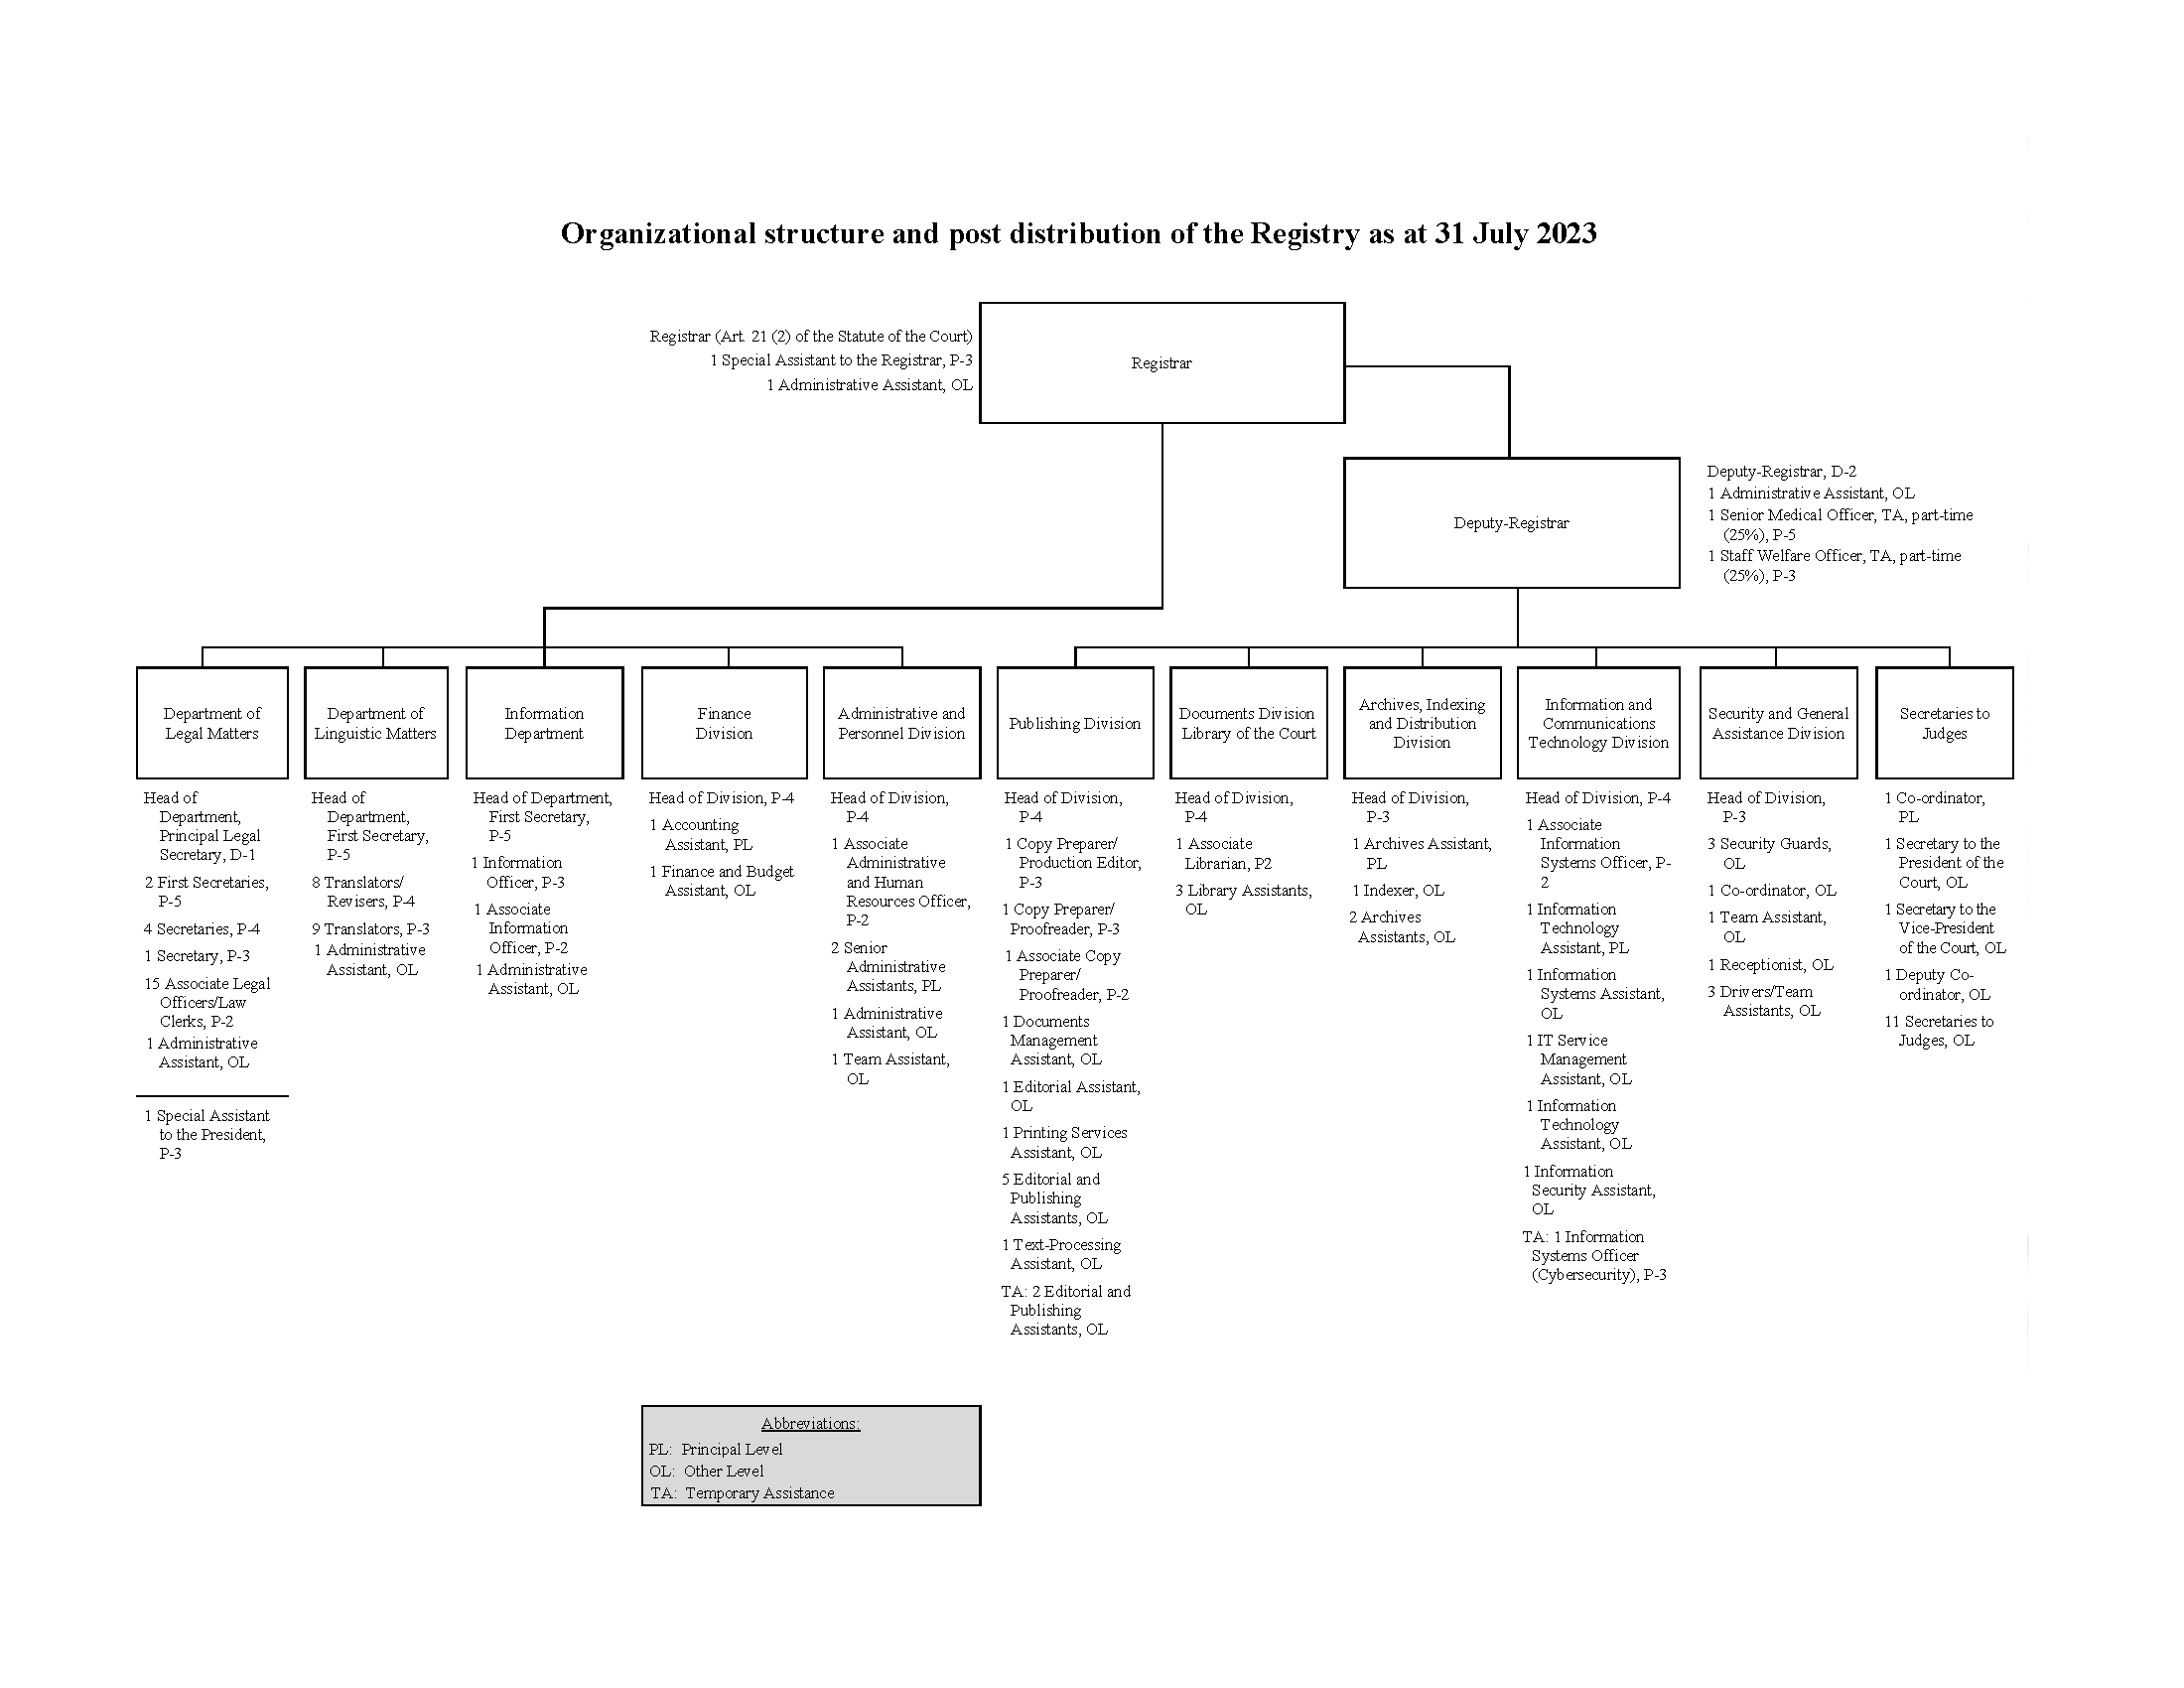 Organizarional chart of the Registry as of 31 July 2023